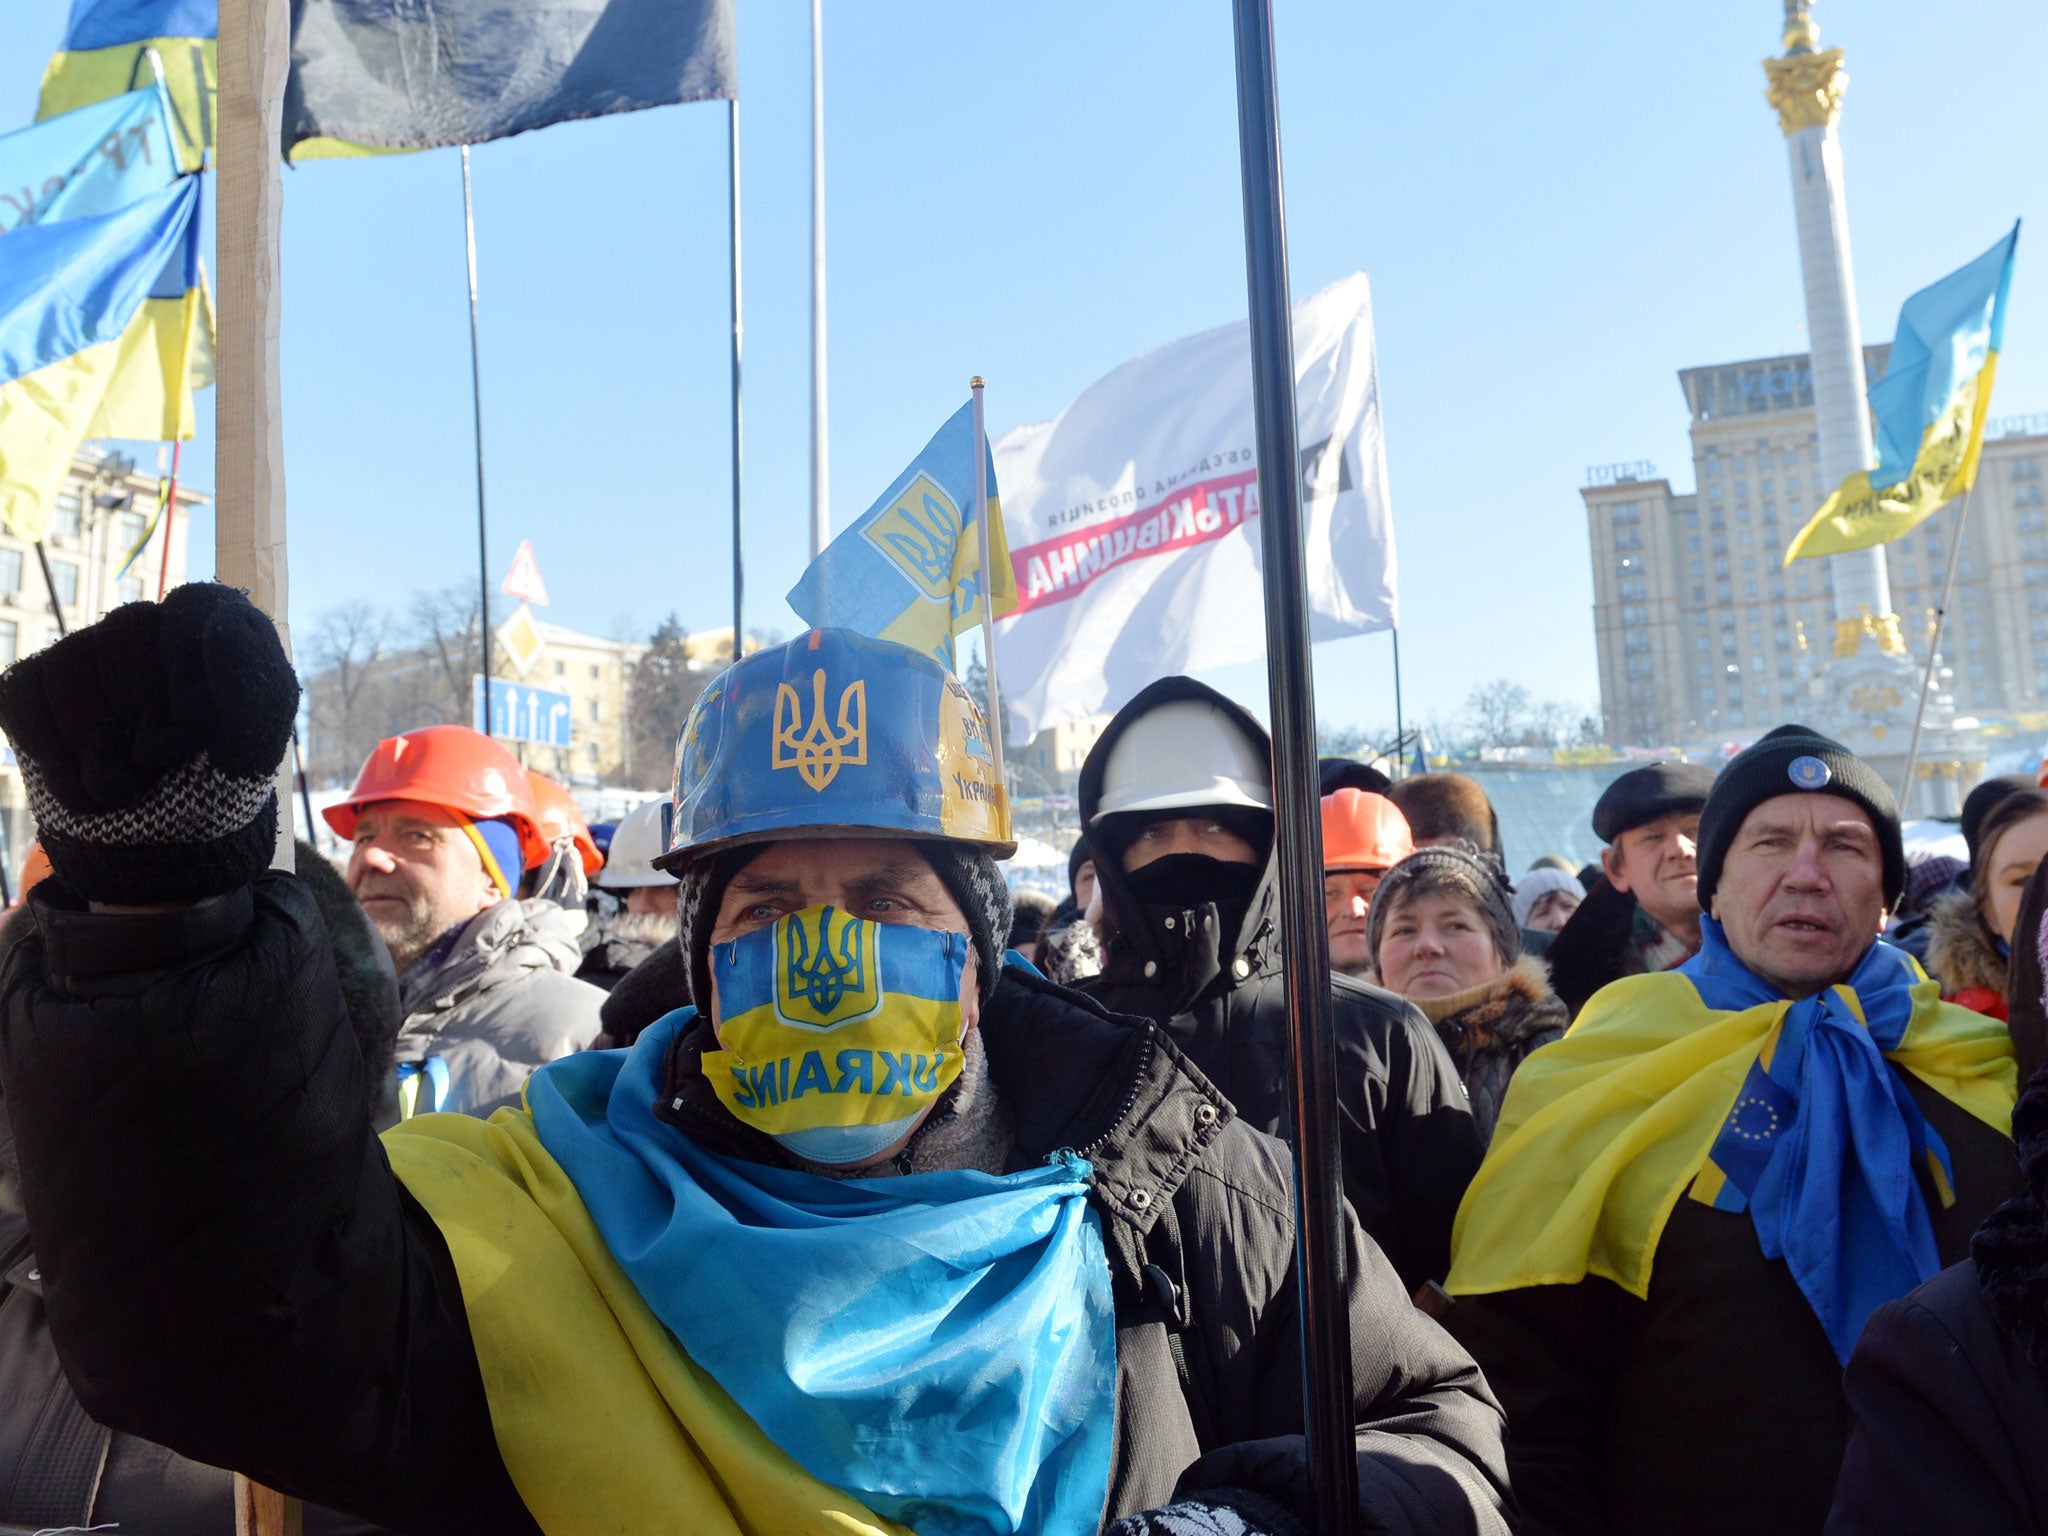 Anti-government protesters take part in a demo in Kiev on Sunday. Ukraine's opposition holds a new rally amid concern about military intervention in the country's worst crisis since independence.